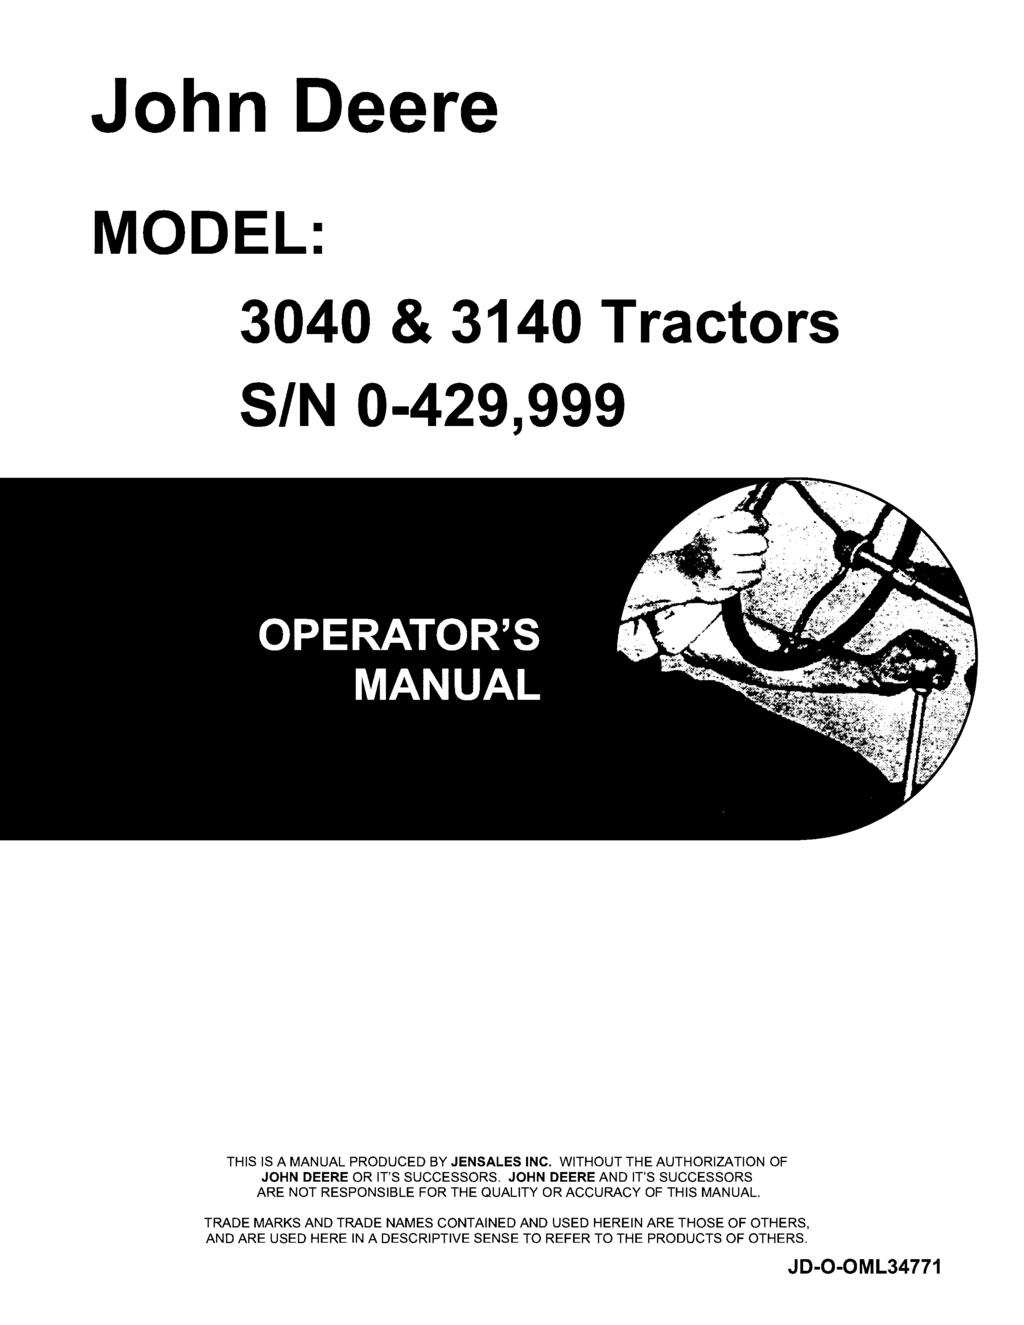 John Deere MODEL: 3040 & 3140 Tractors S/N 0-429,999 THIS IS A MANUAL PRODUCED BY JENSALES INC. WITHOUT THE AUTHORIZATION OF JOHN DEERE OR IT'S SUCCESSORS.